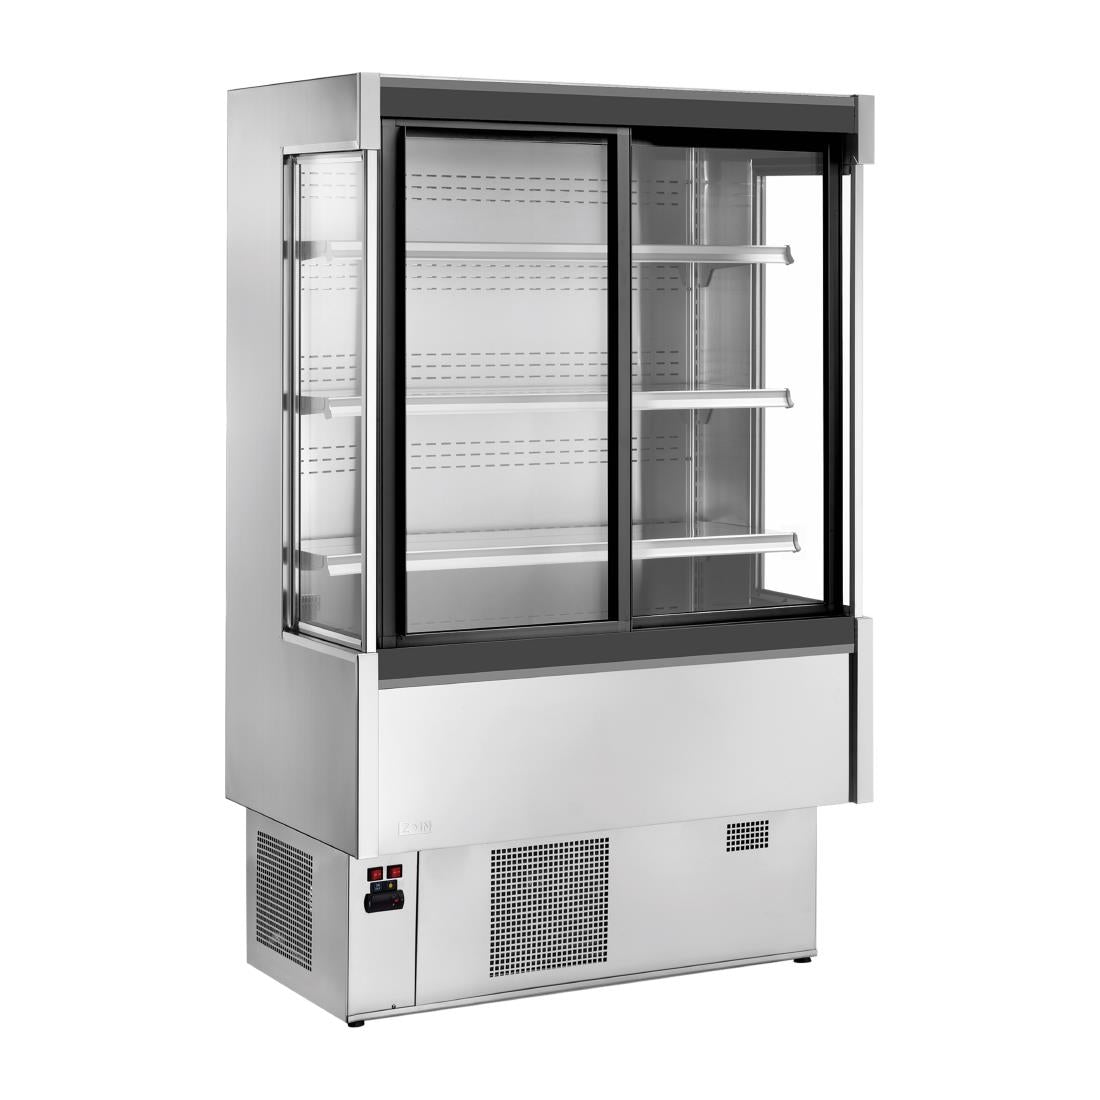 UA056-100 Zoin Silver Multideck Display Stainless Steel Finish with Sliding Doors 1000mm